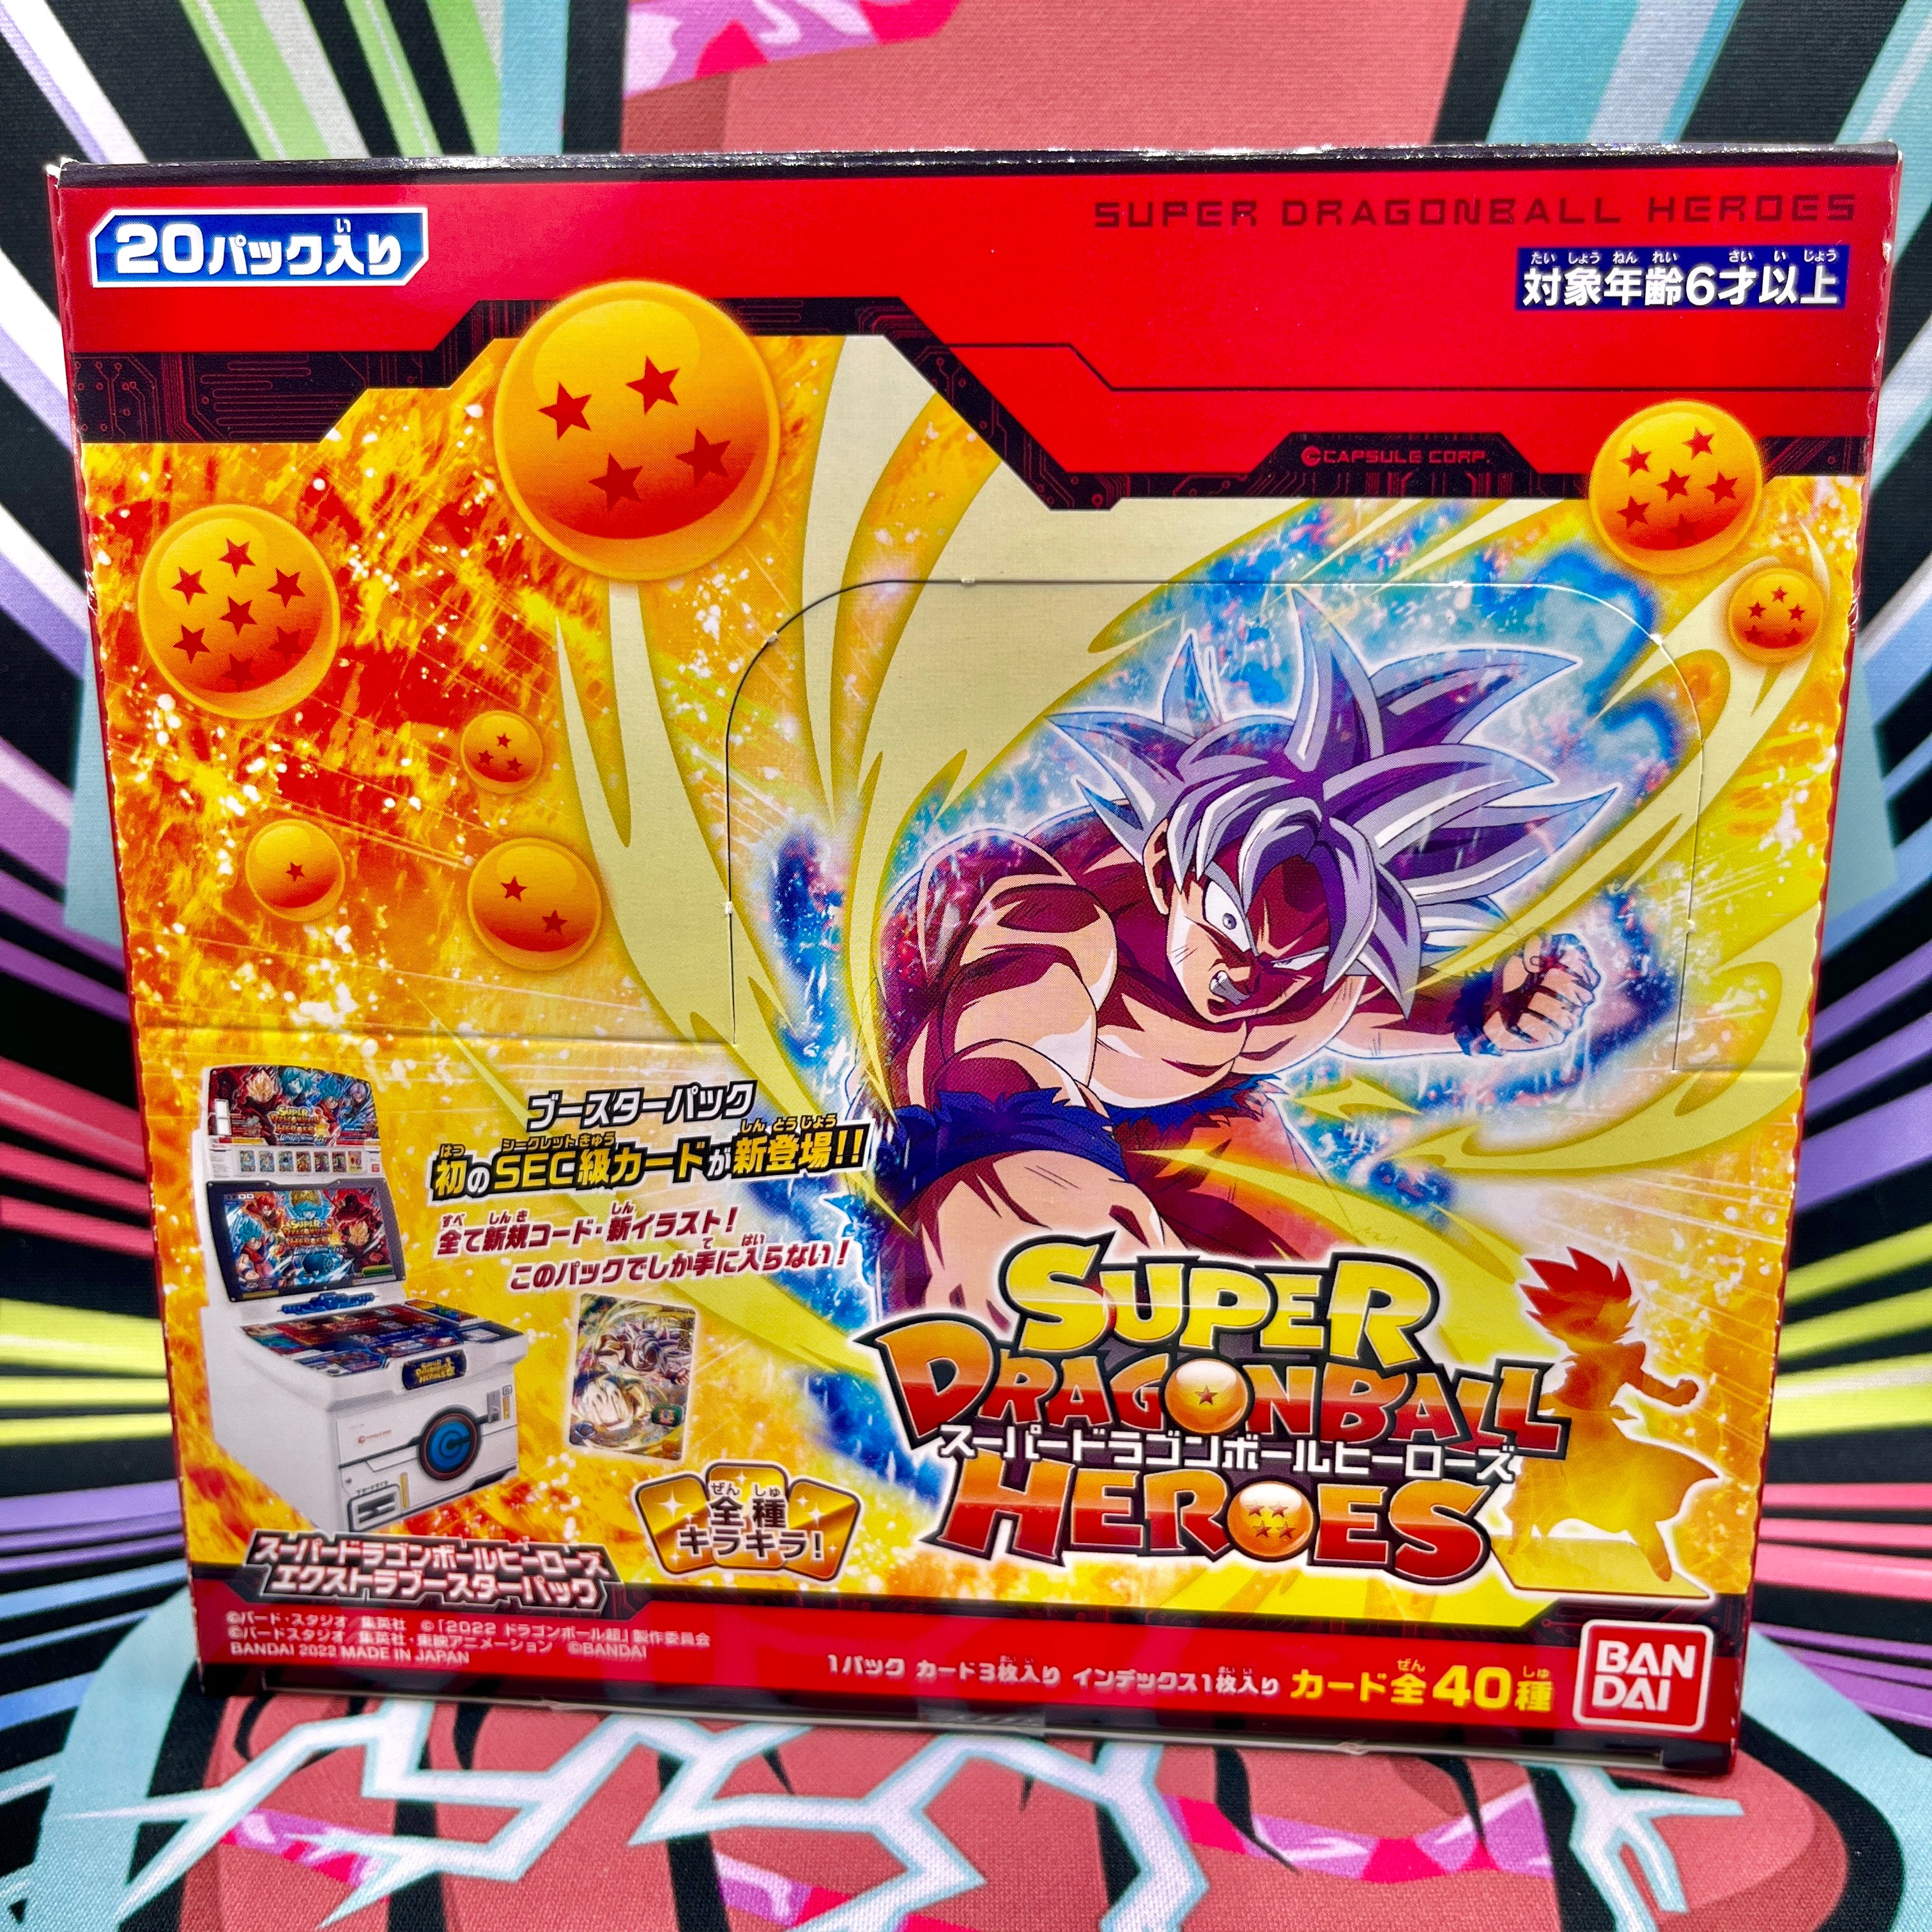 SDBH PUMS11 Extra Booster Pack Vol. 1 Box (2022)